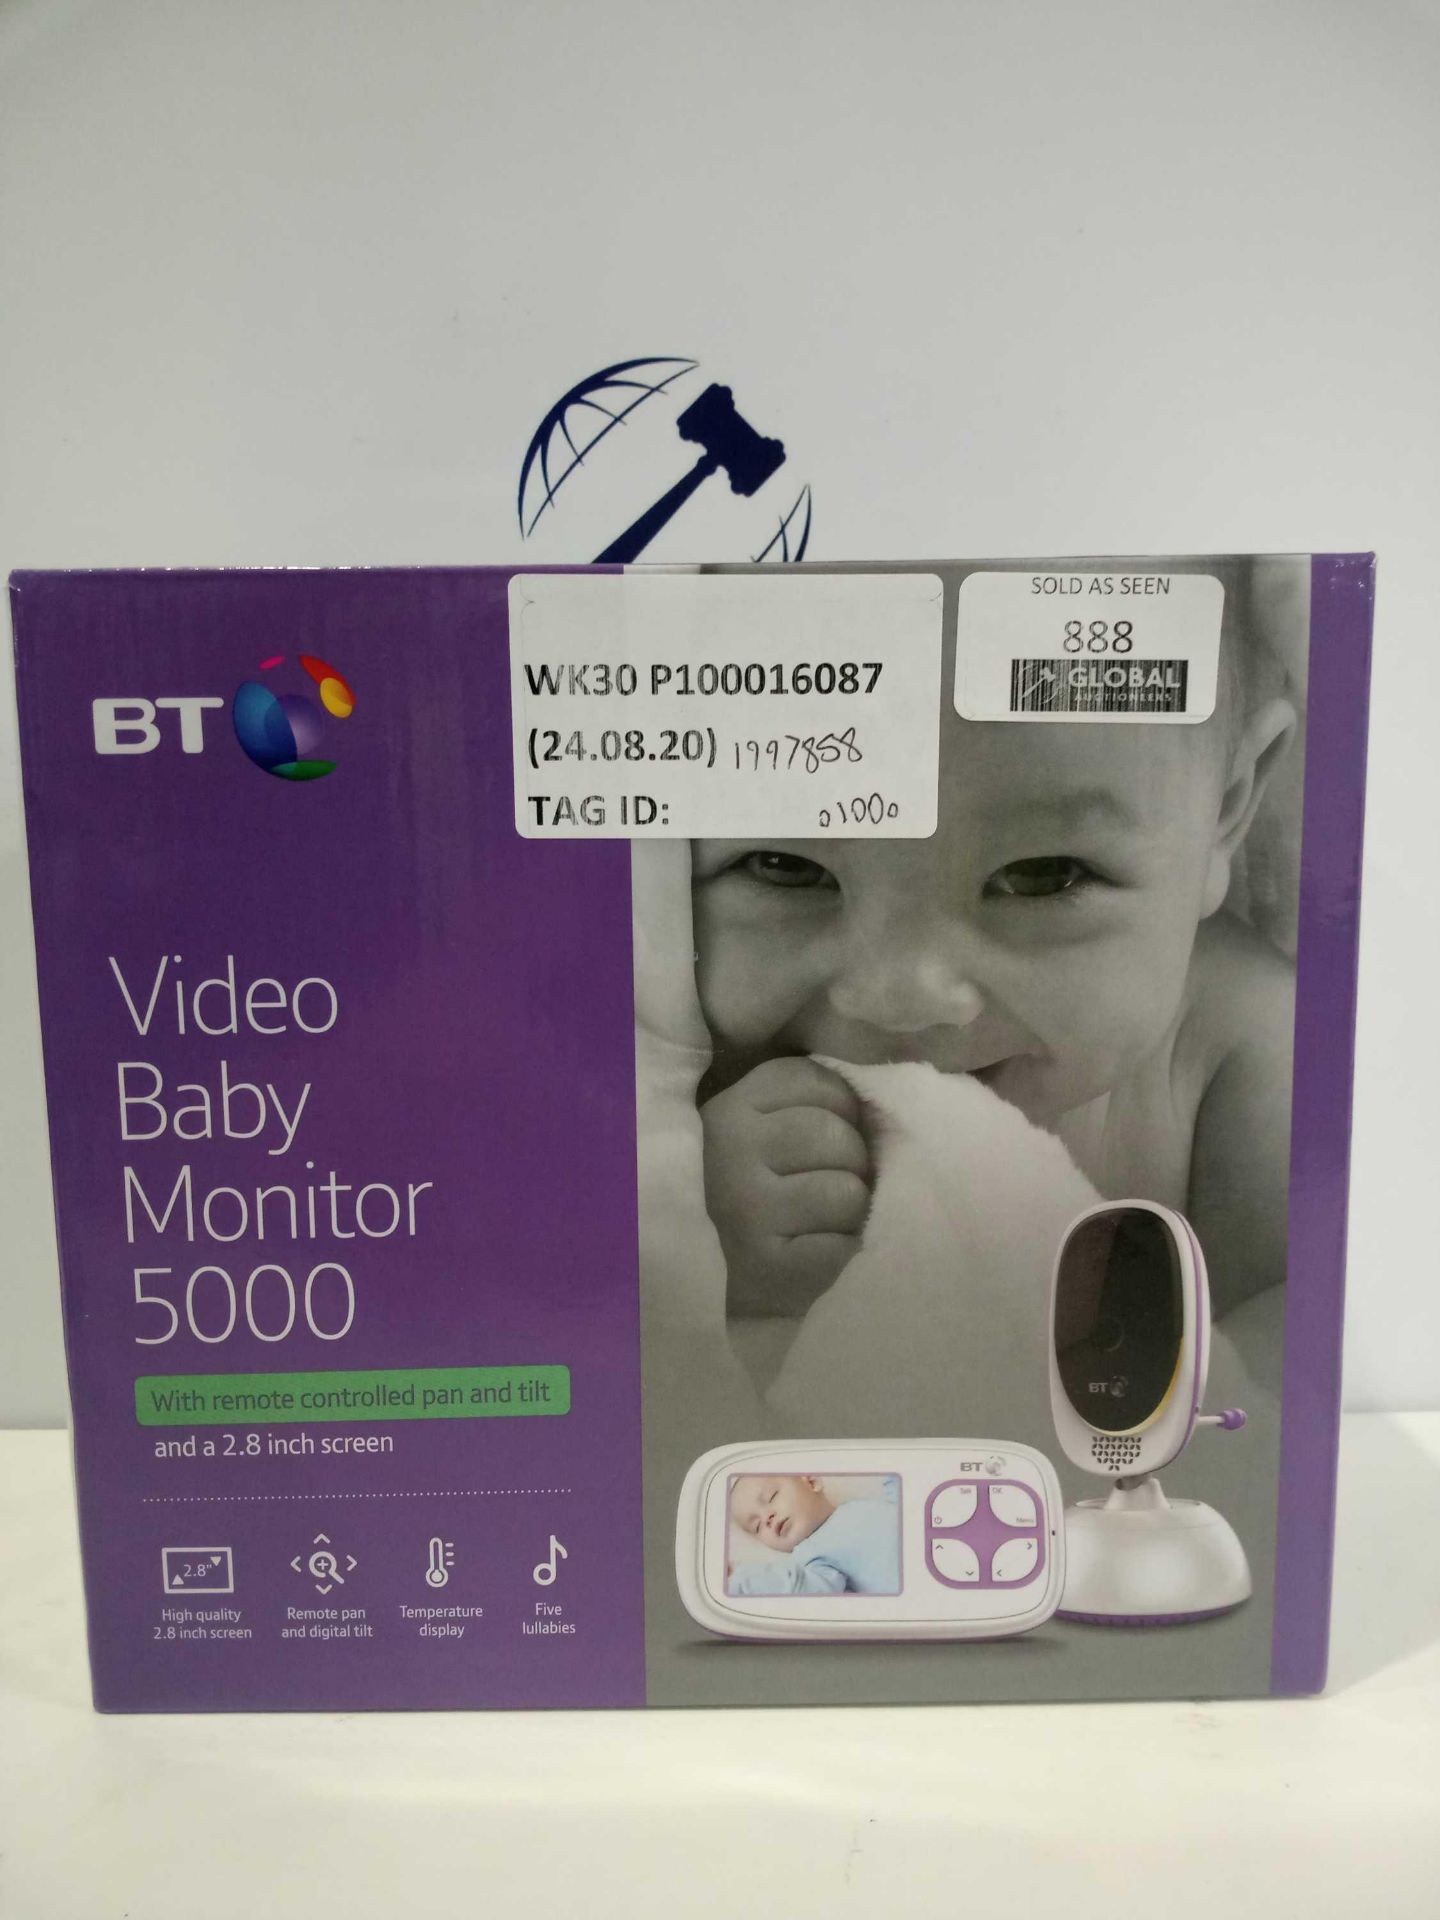 Rrp £100 Boxed Bt Video Baby Monitor 5000 2.8 Inch Screen Digital Baby Monitor With Remote Controlle